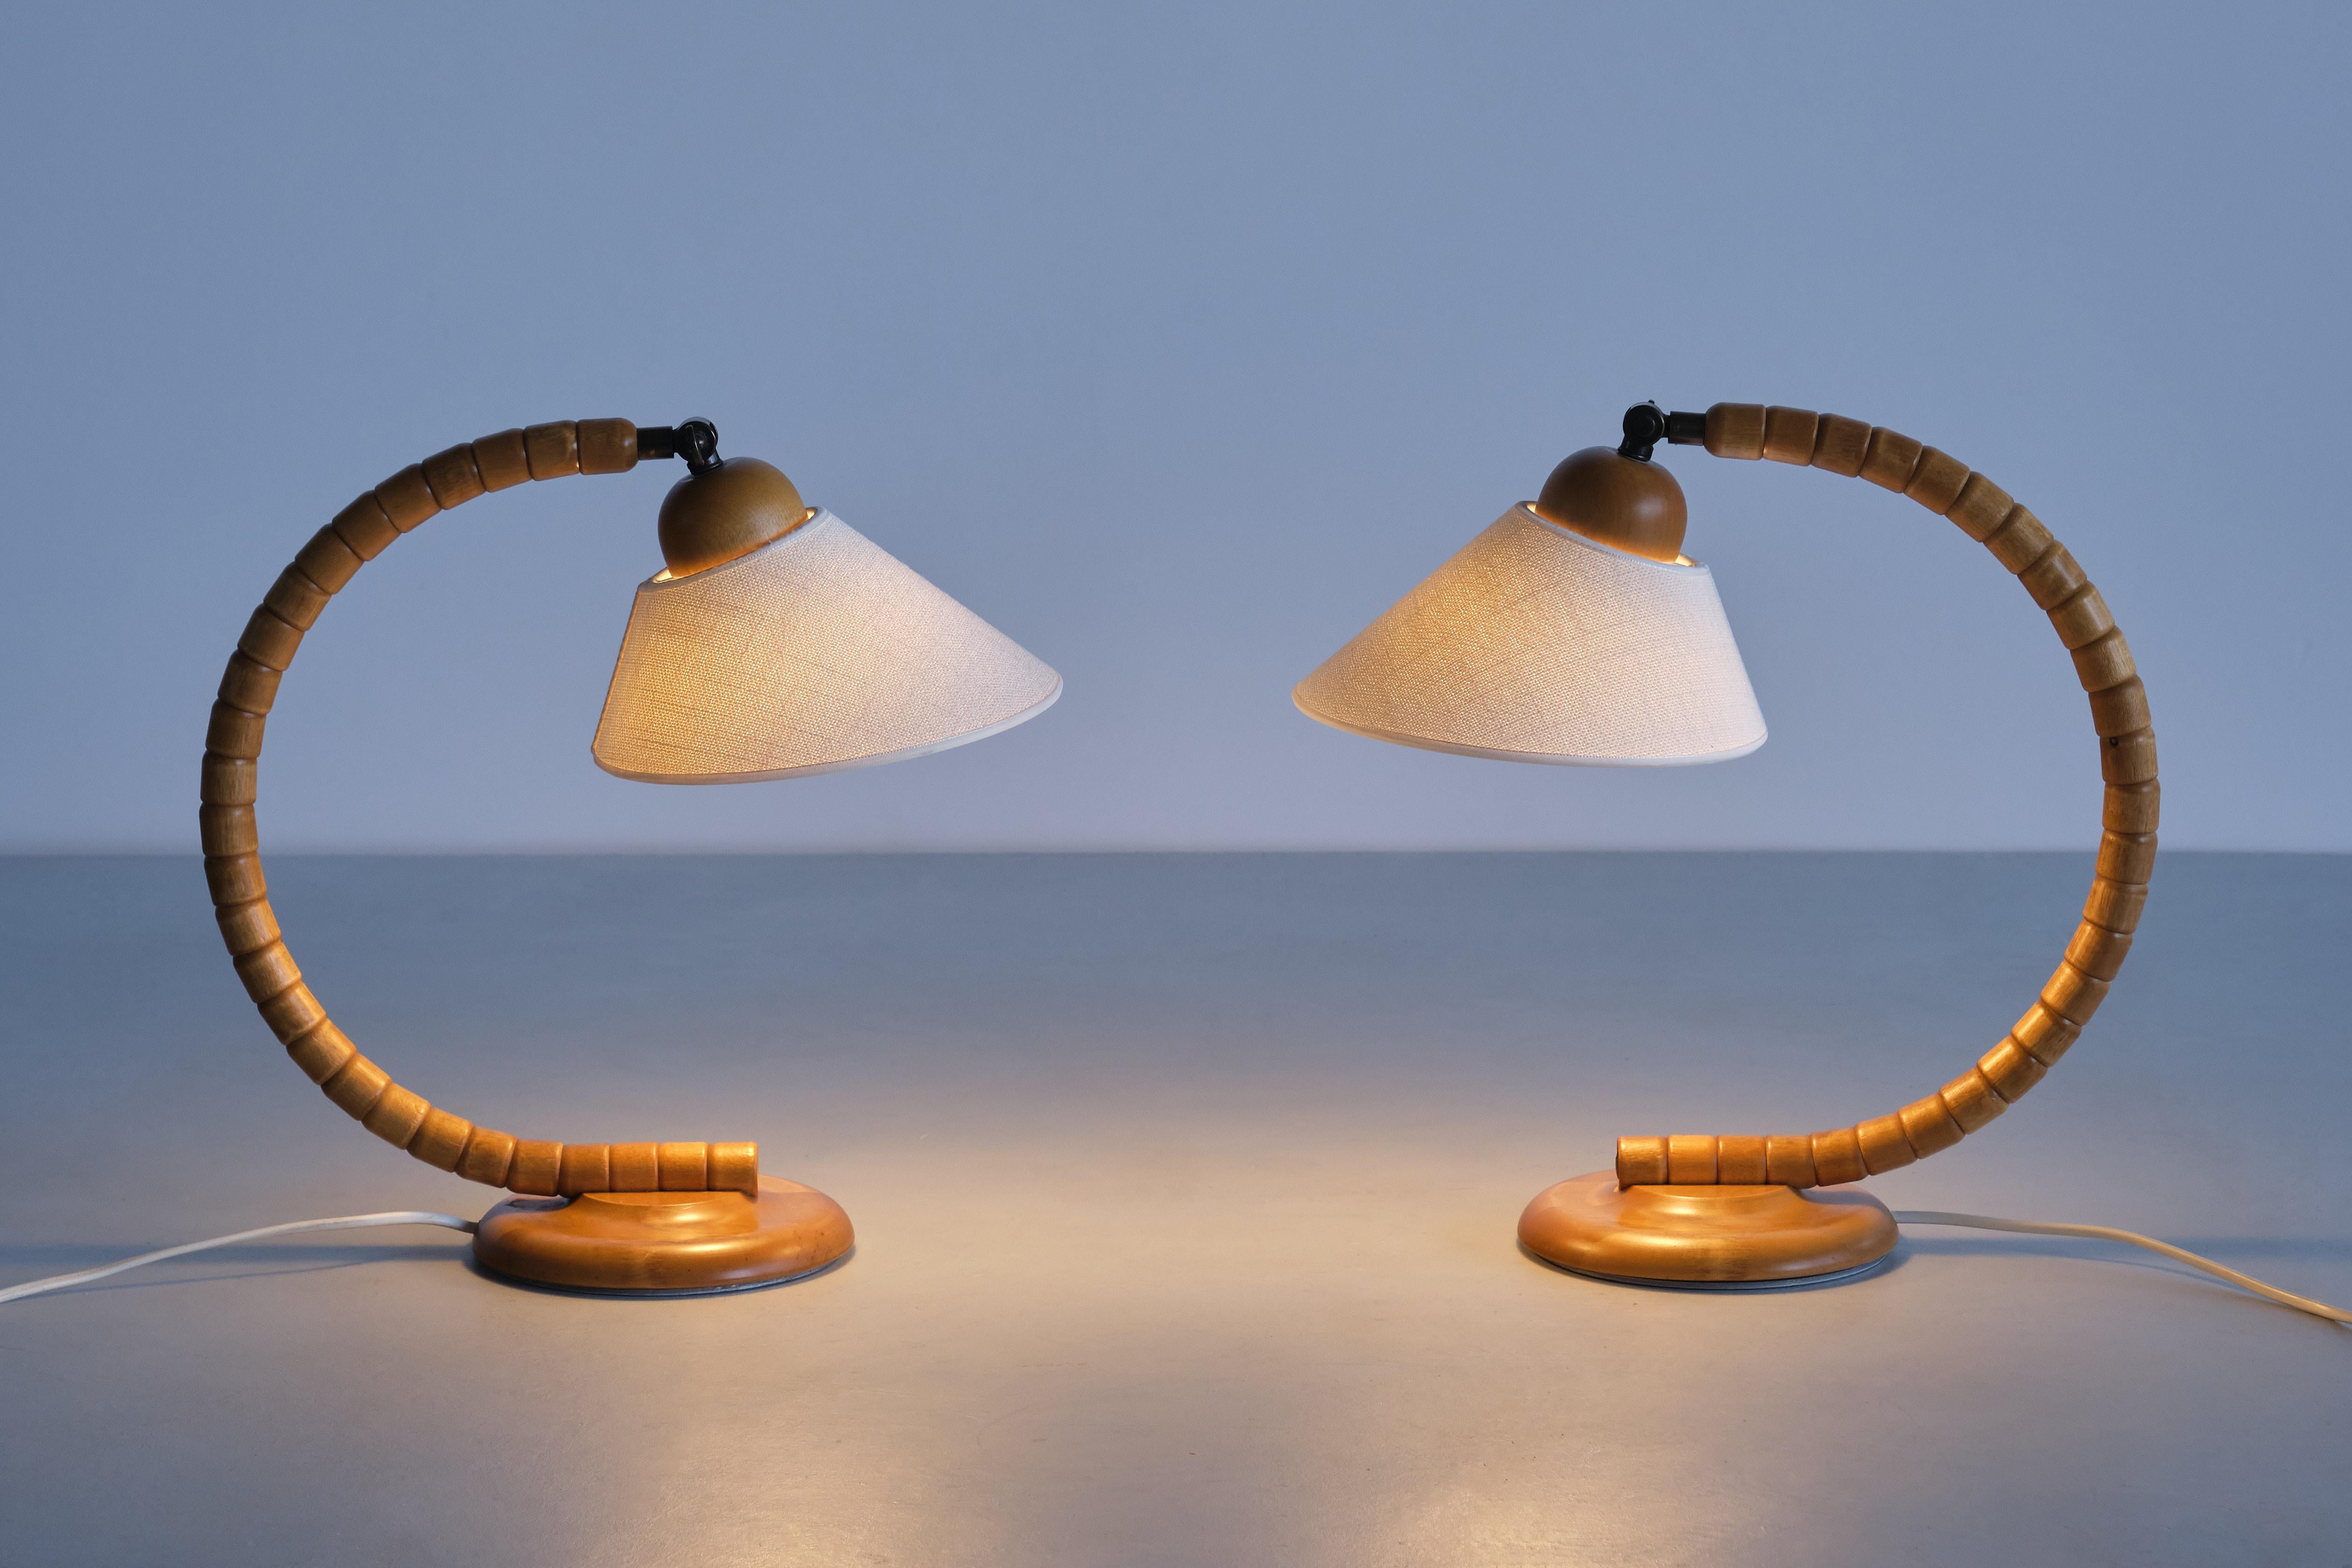 This striking pair of table lamps was produced by Markslöjd in Kinna, Sweden in the 1960s. The design is marked by the sculptural, organic shaped frame resting on a circular base. The base is made of solid stained beech wood. Brass fittings, and